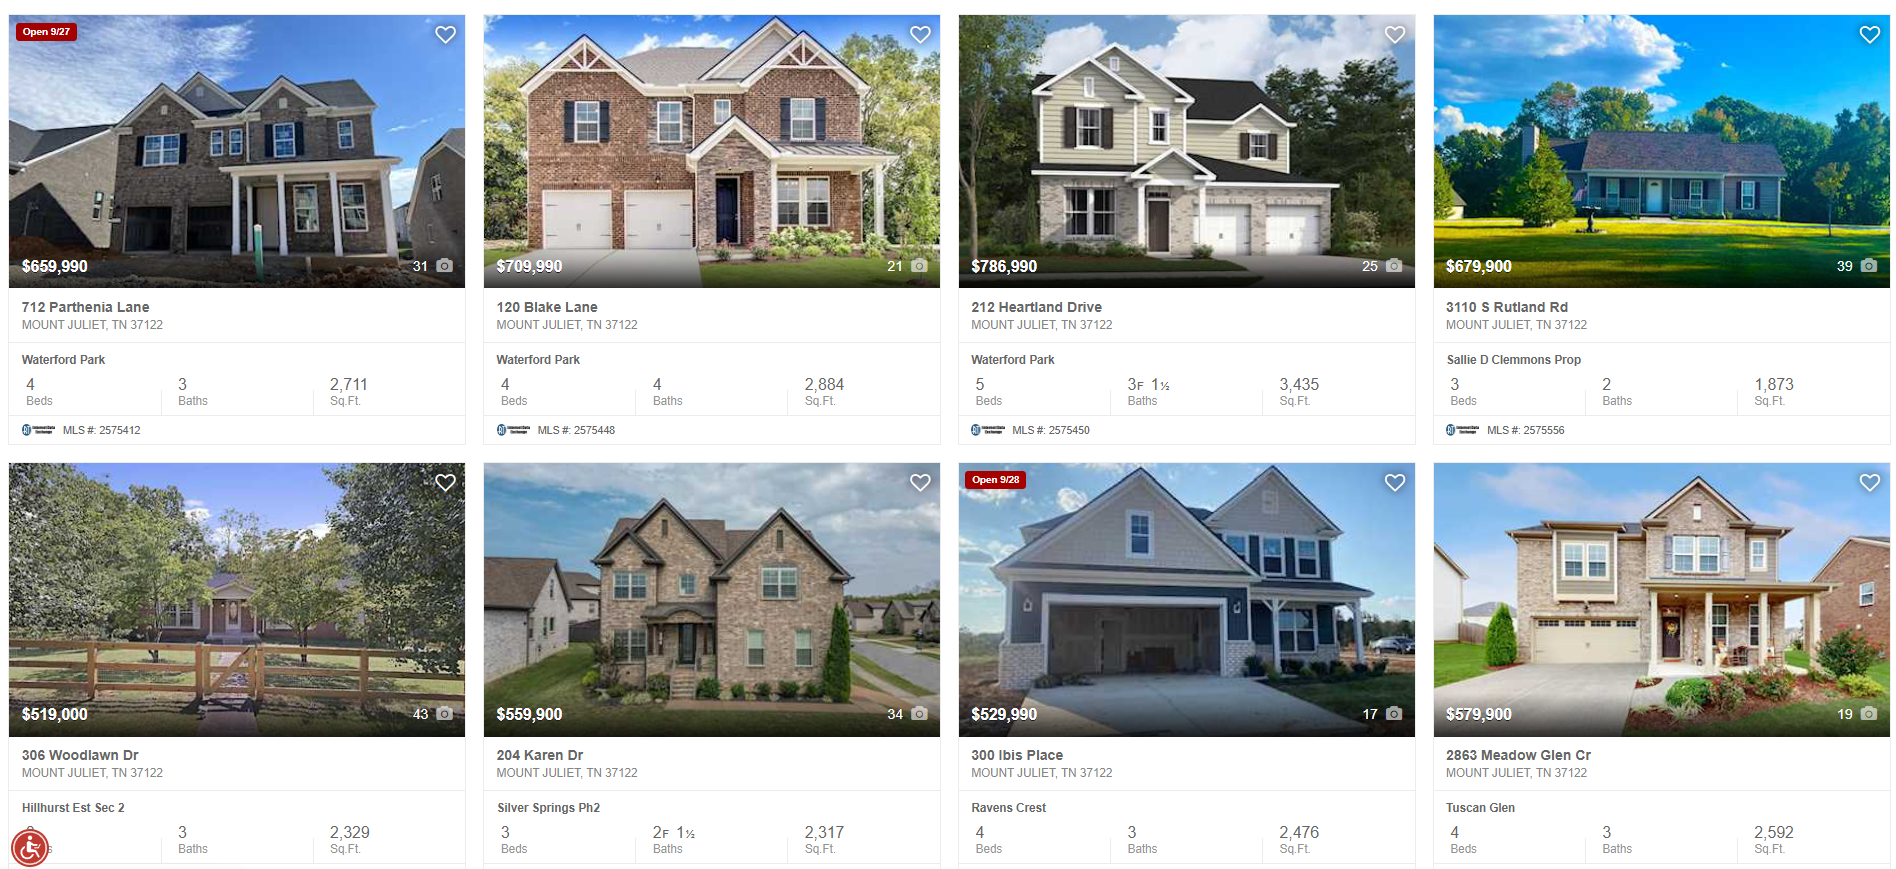 5 Reasons Why You Should Consider Moving to Mount Juliet, Homes for sale  in Mount Juliet